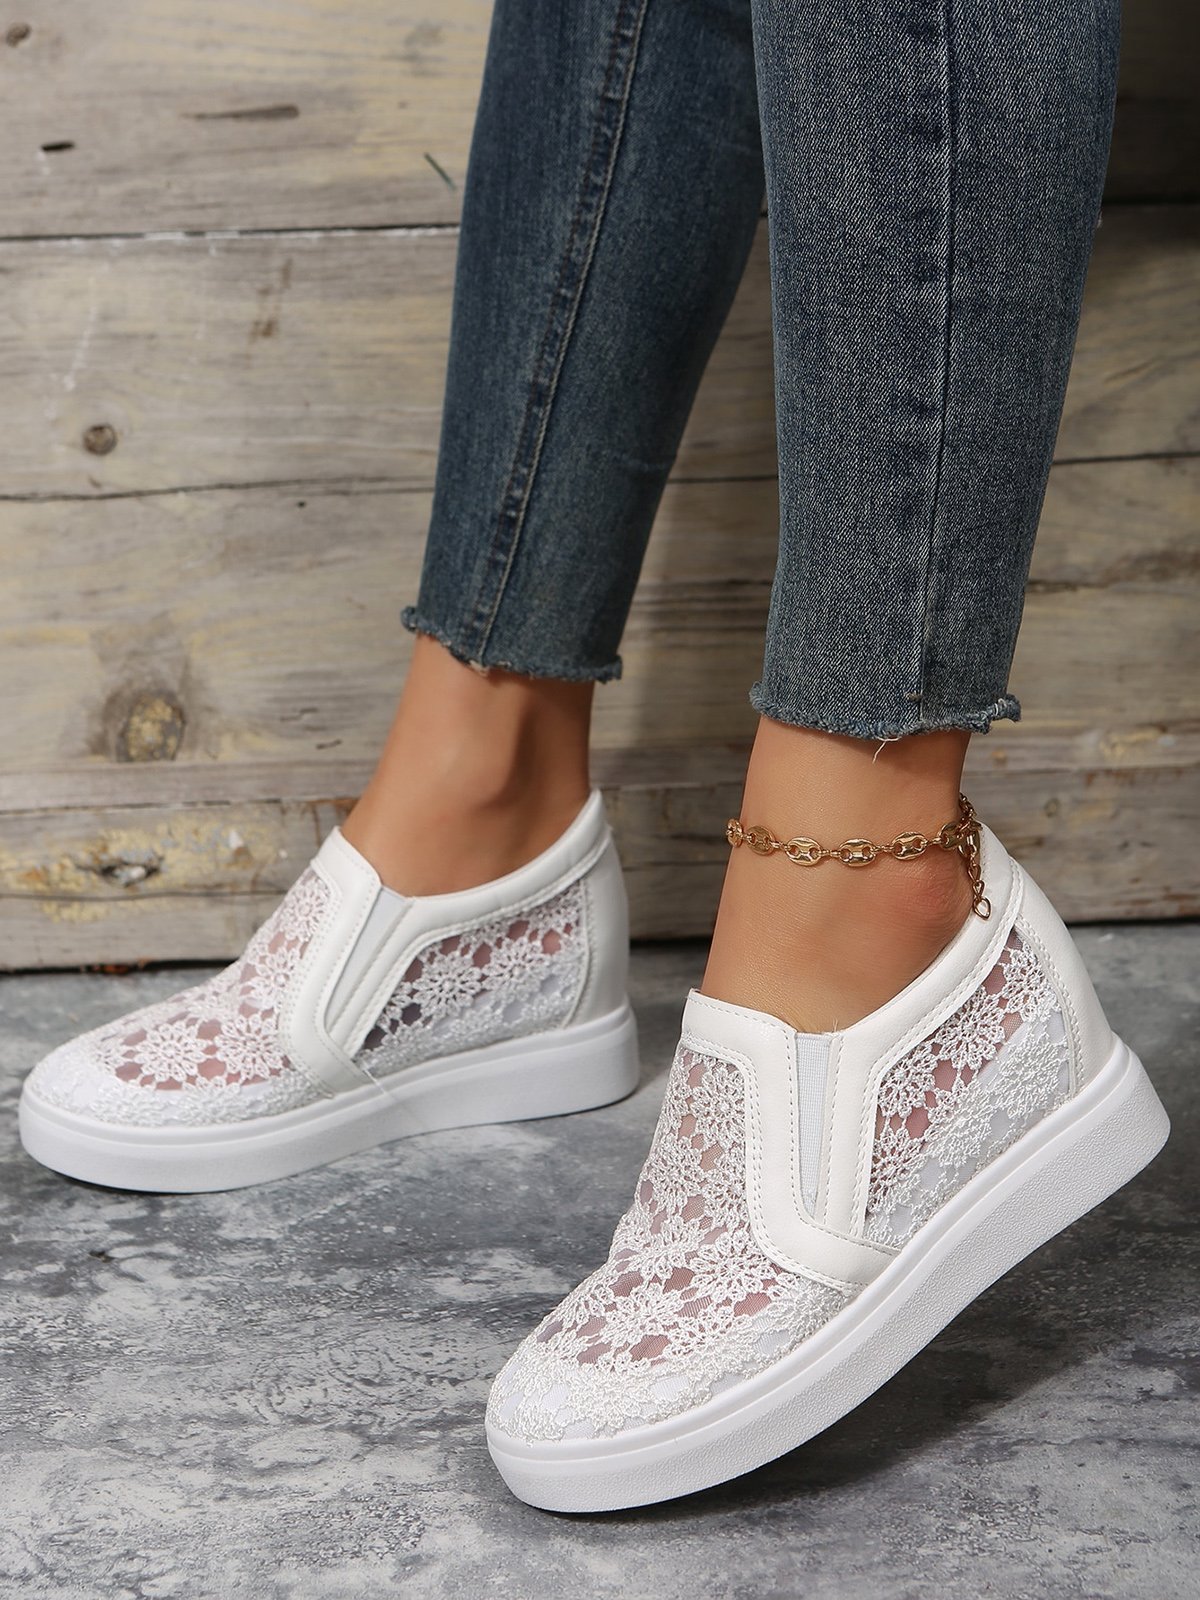 Flower Embroidery Lace Detail Hidden Heeled Shoes